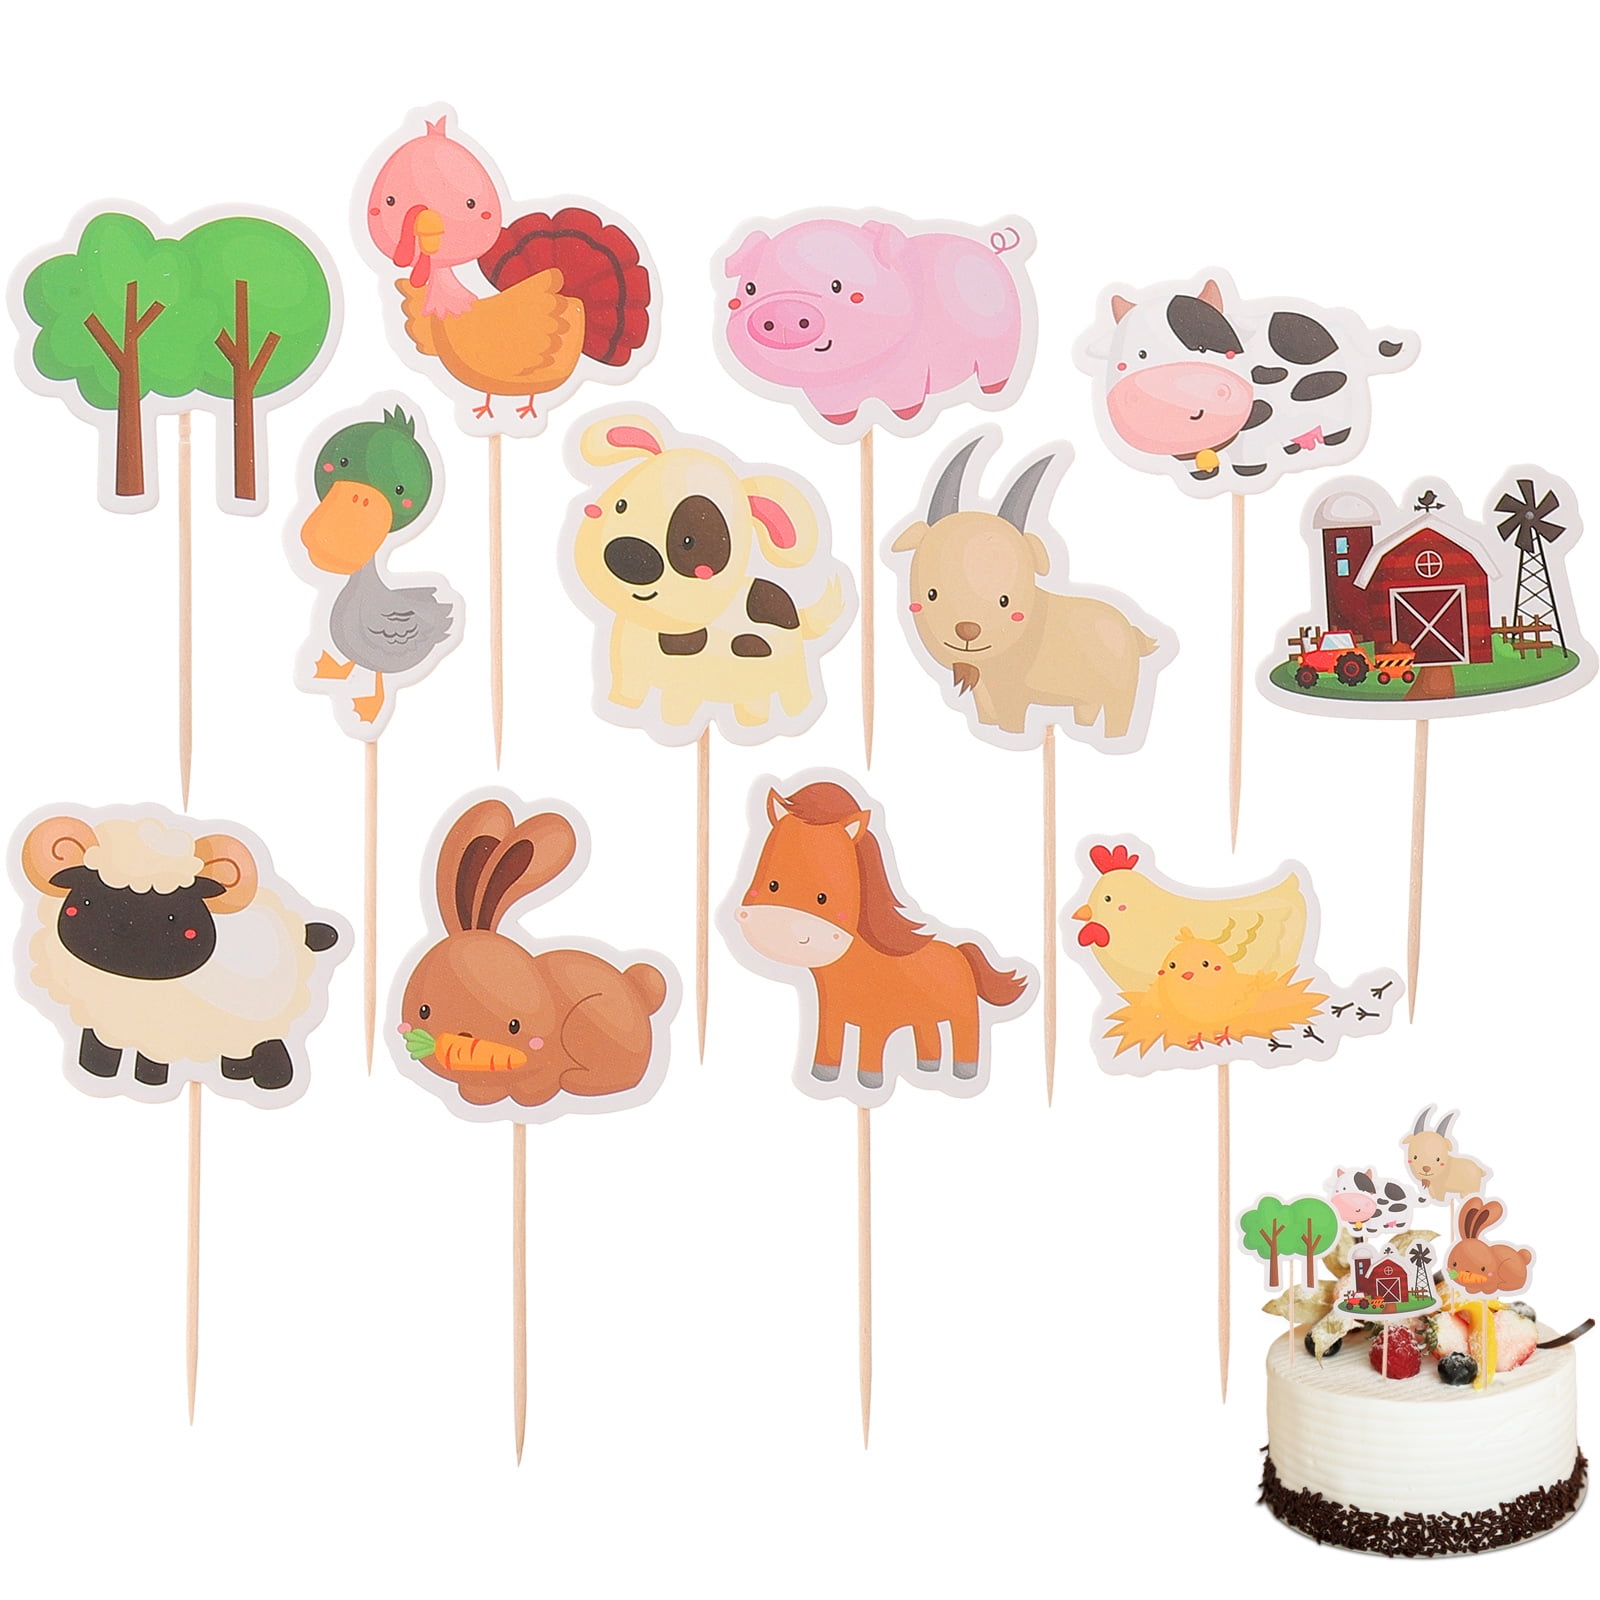 12 x 2 / 5cm Cute Highland Cow cupcake toppers wafer paper or icing